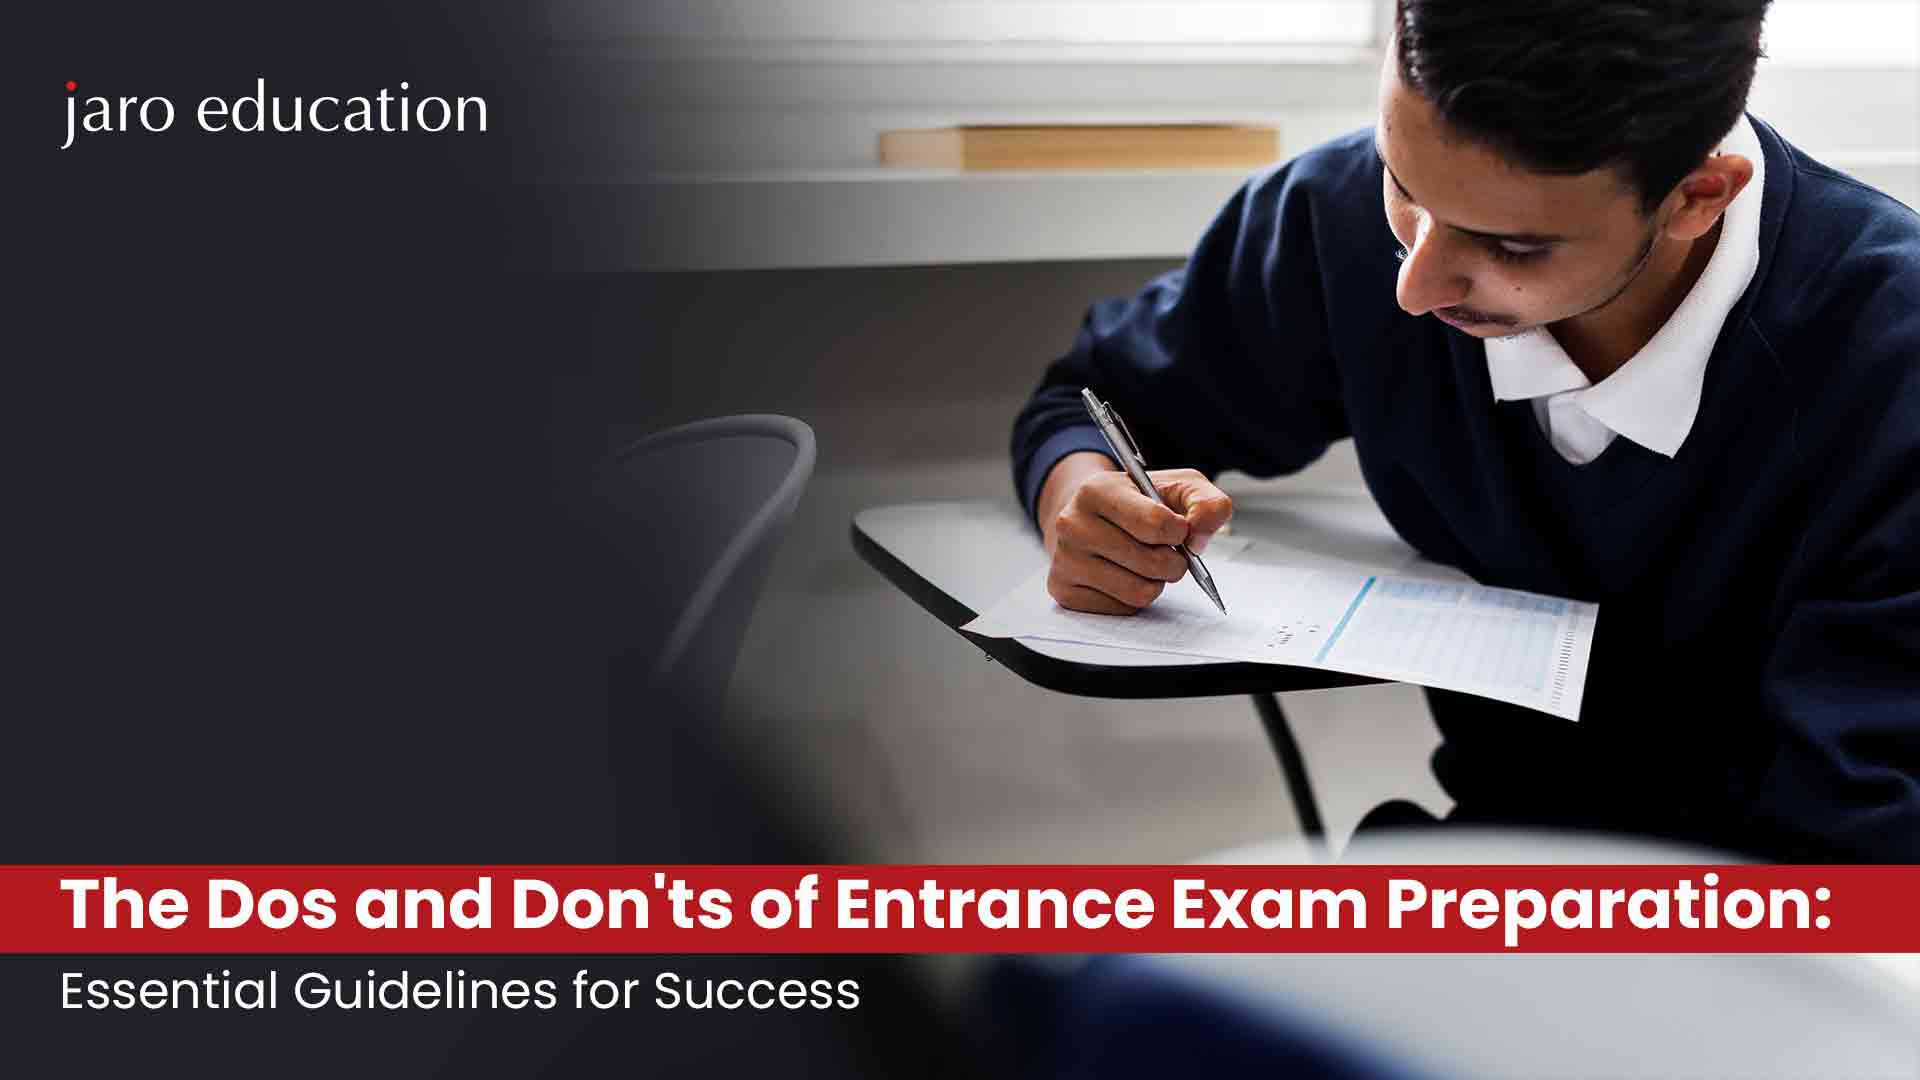 The-Dos-and-Don'ts-of-Entrance-Exam-Preparation-Essential-Guidelines-for-Success